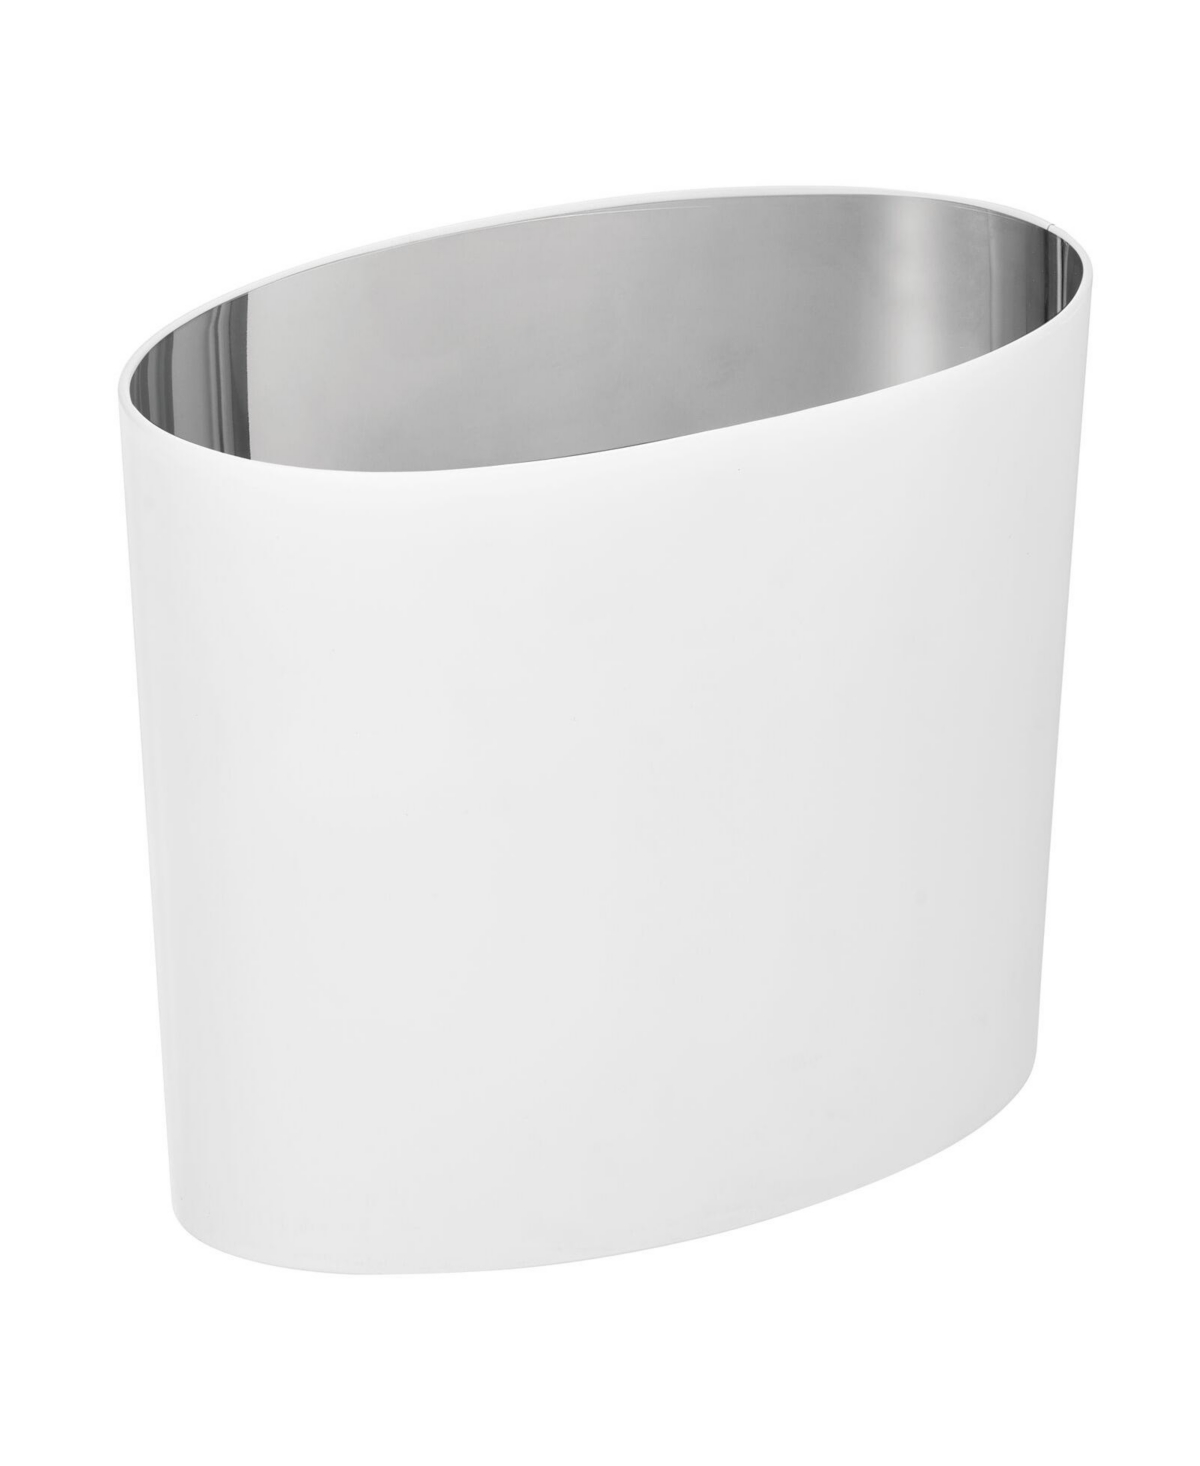 Metal Oval Small 1.8 Gallon Trash Can for Bathroom - White - White